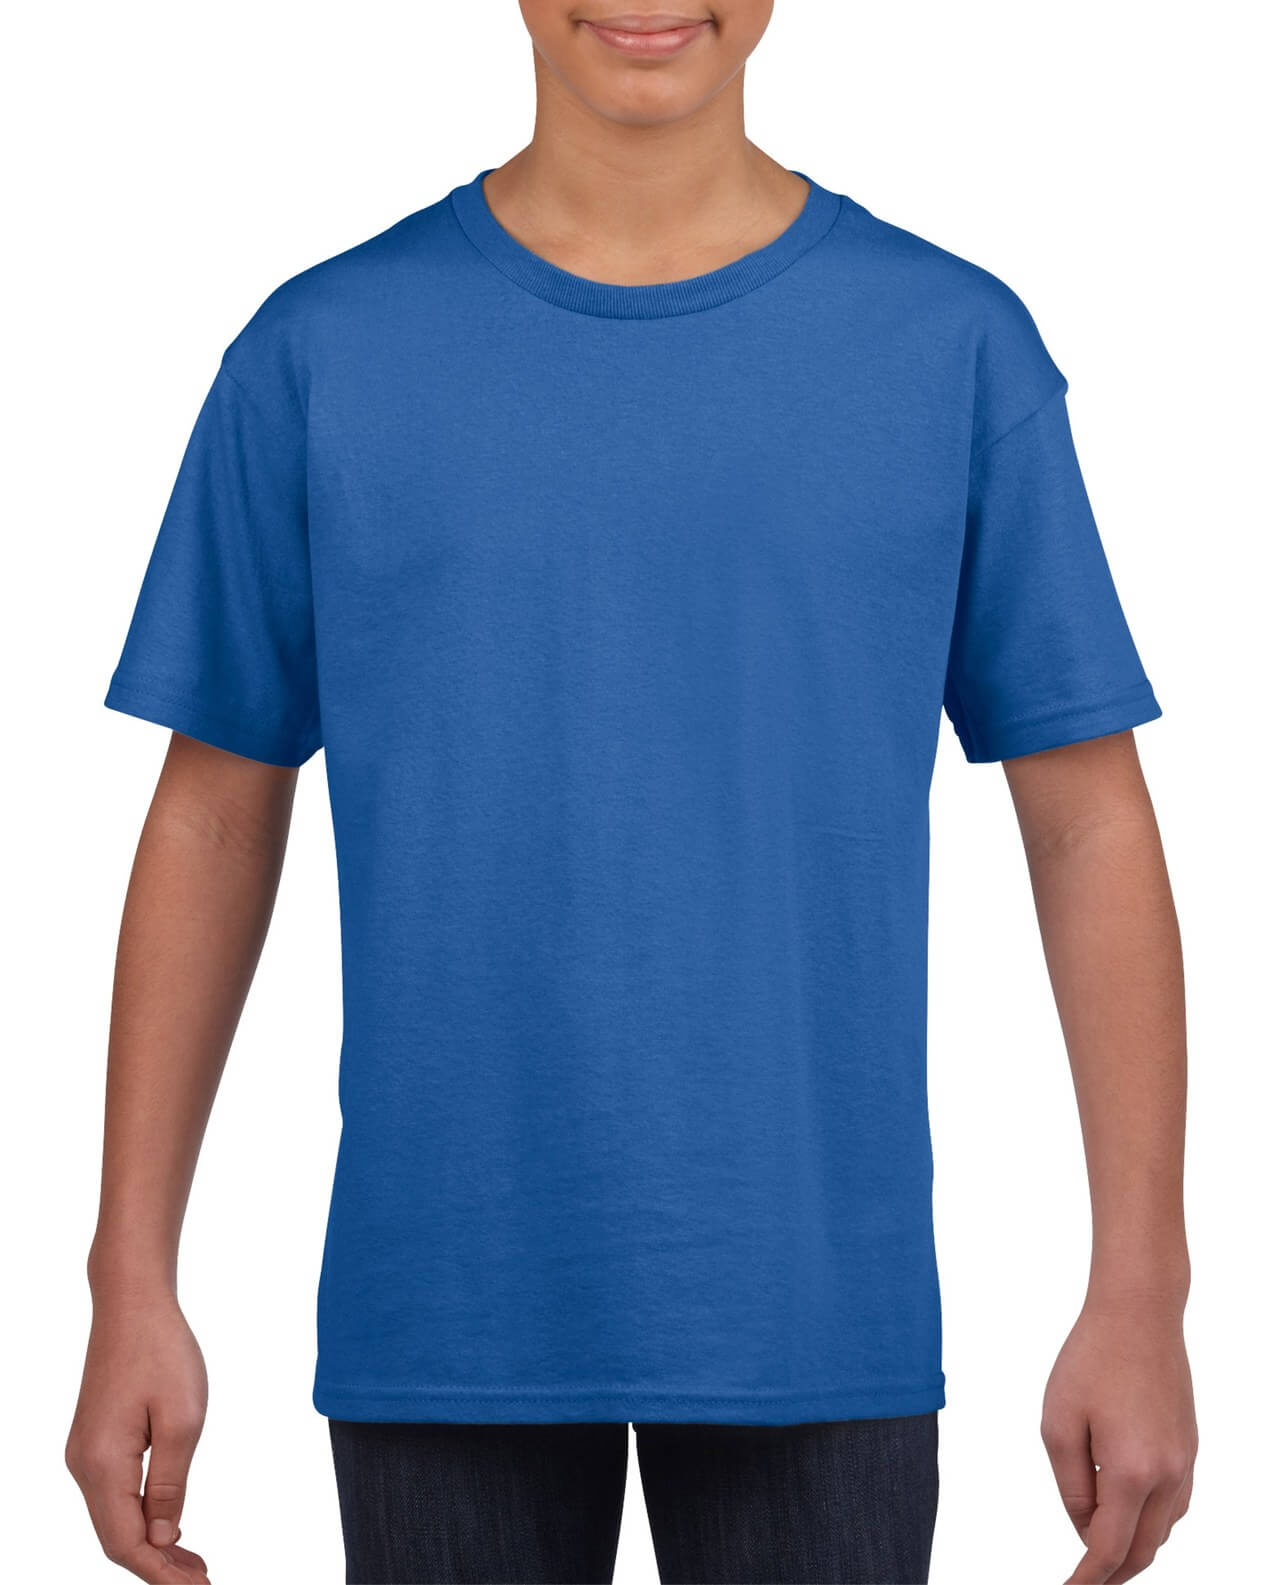 Gildan Men's Softstyle Printed T-Shirt from embroidered workwear site uk  Embroidered Workwear UK